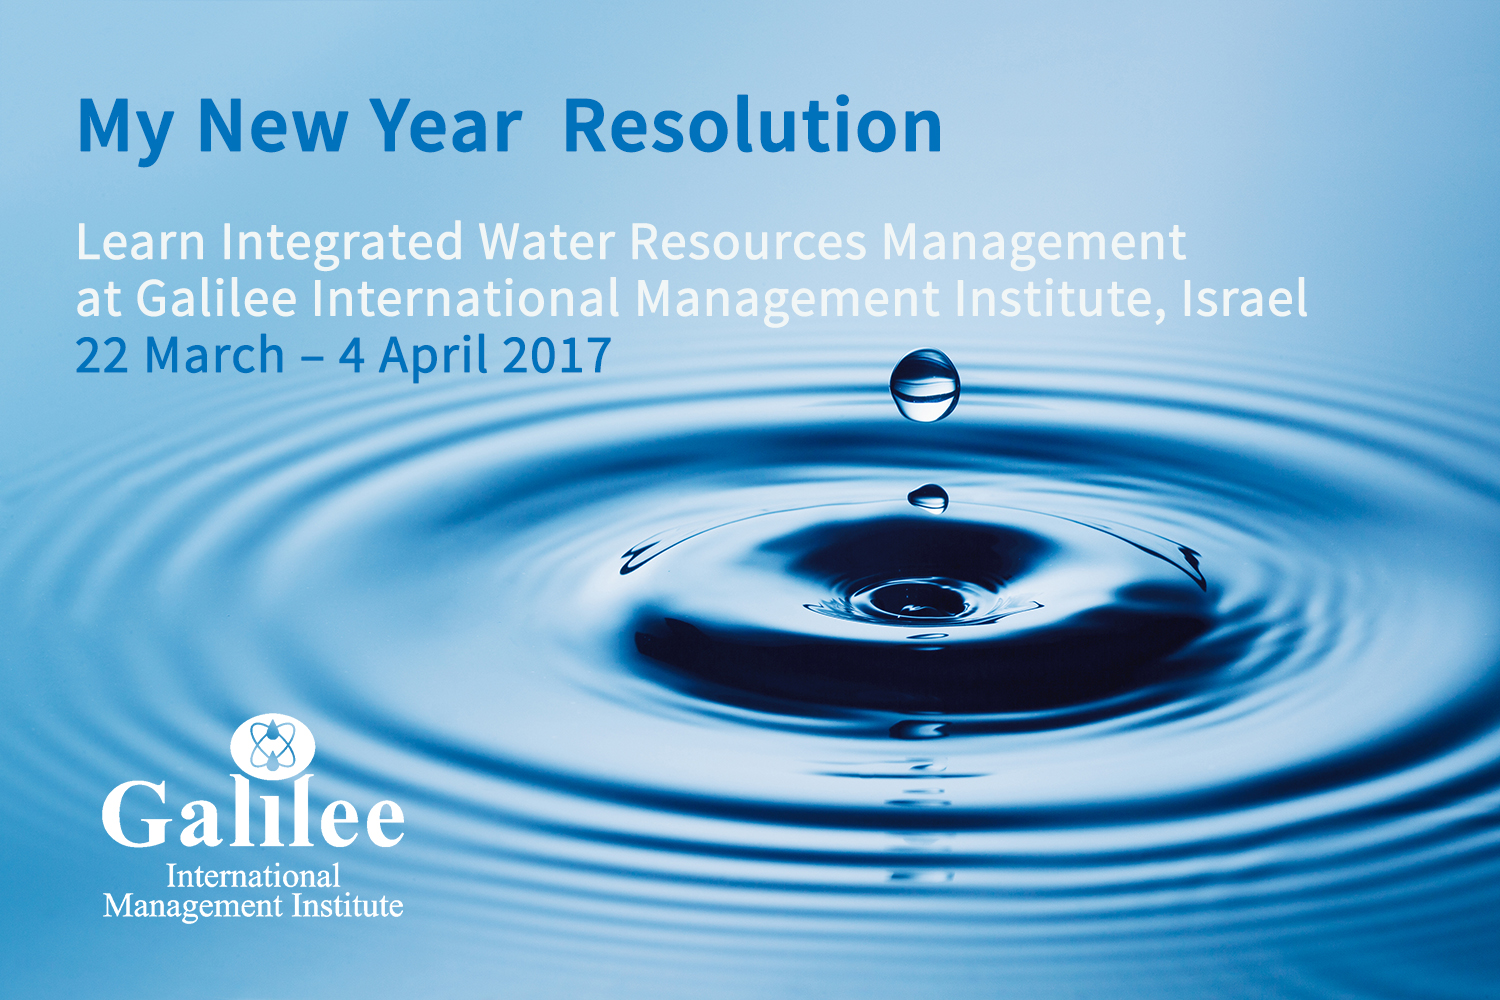 Integrated Water Resources Management Programme 22 March - 4 April 2017, Galilee Institute Israel. To register:&nbsp;http://www.galilcol.ac.il/